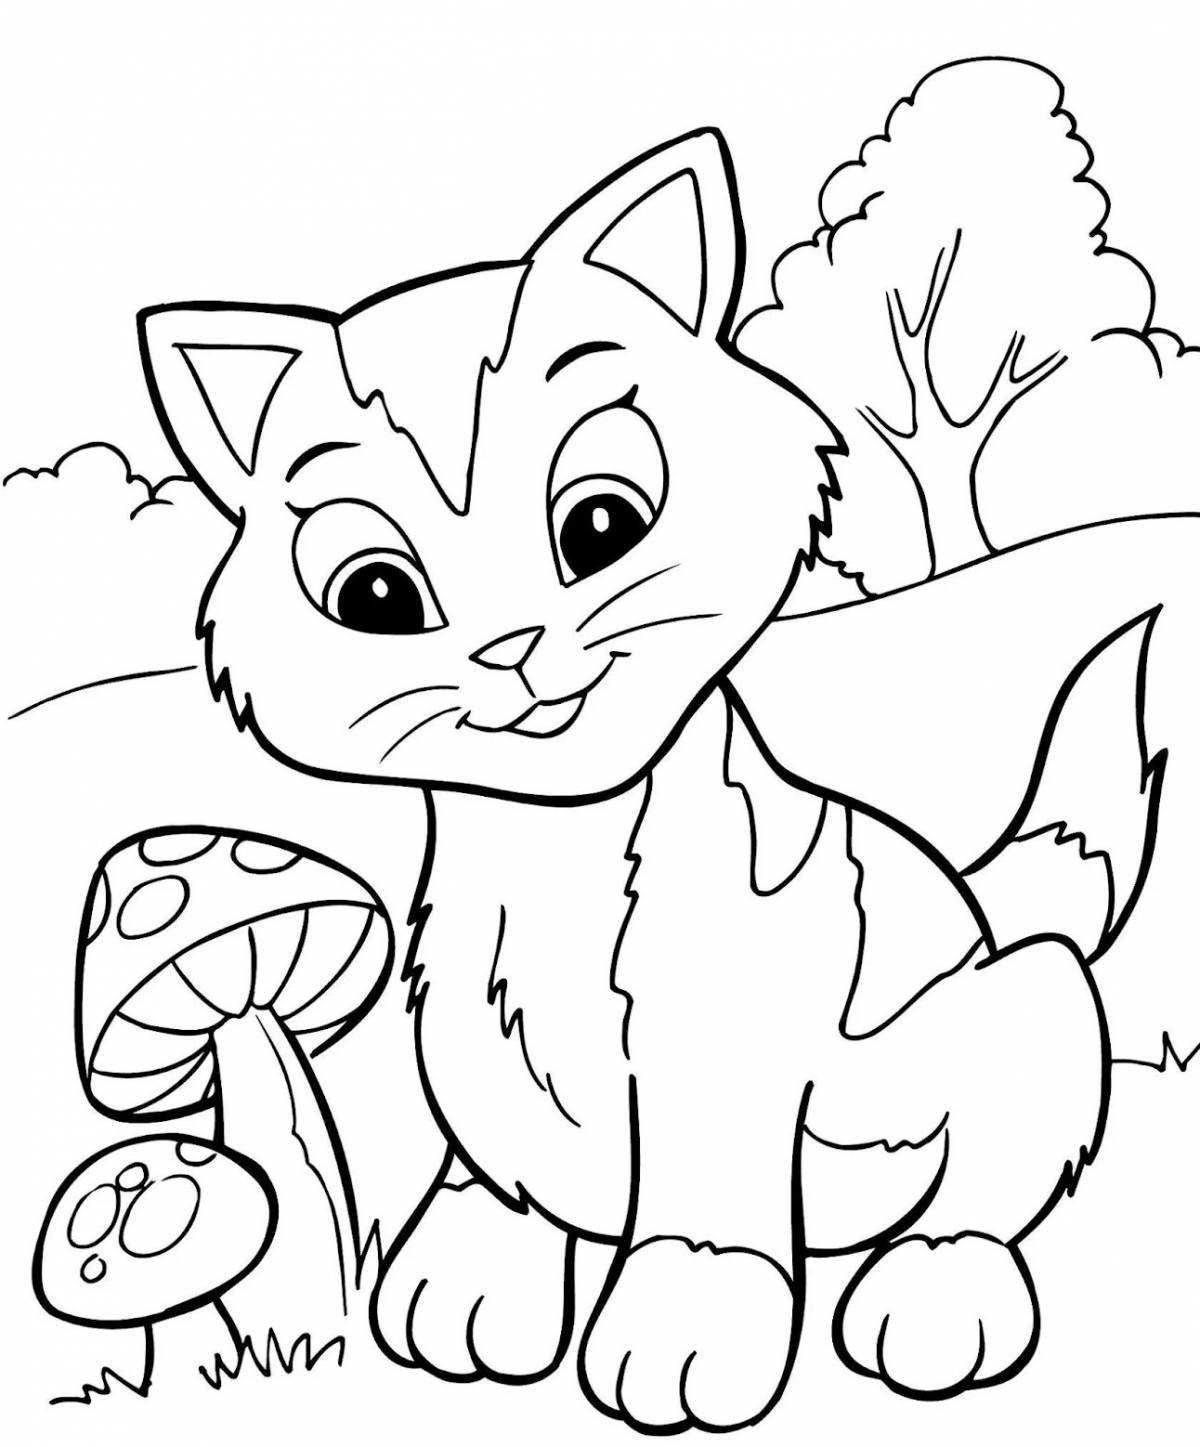 Fluffy cat coloring pages for boys